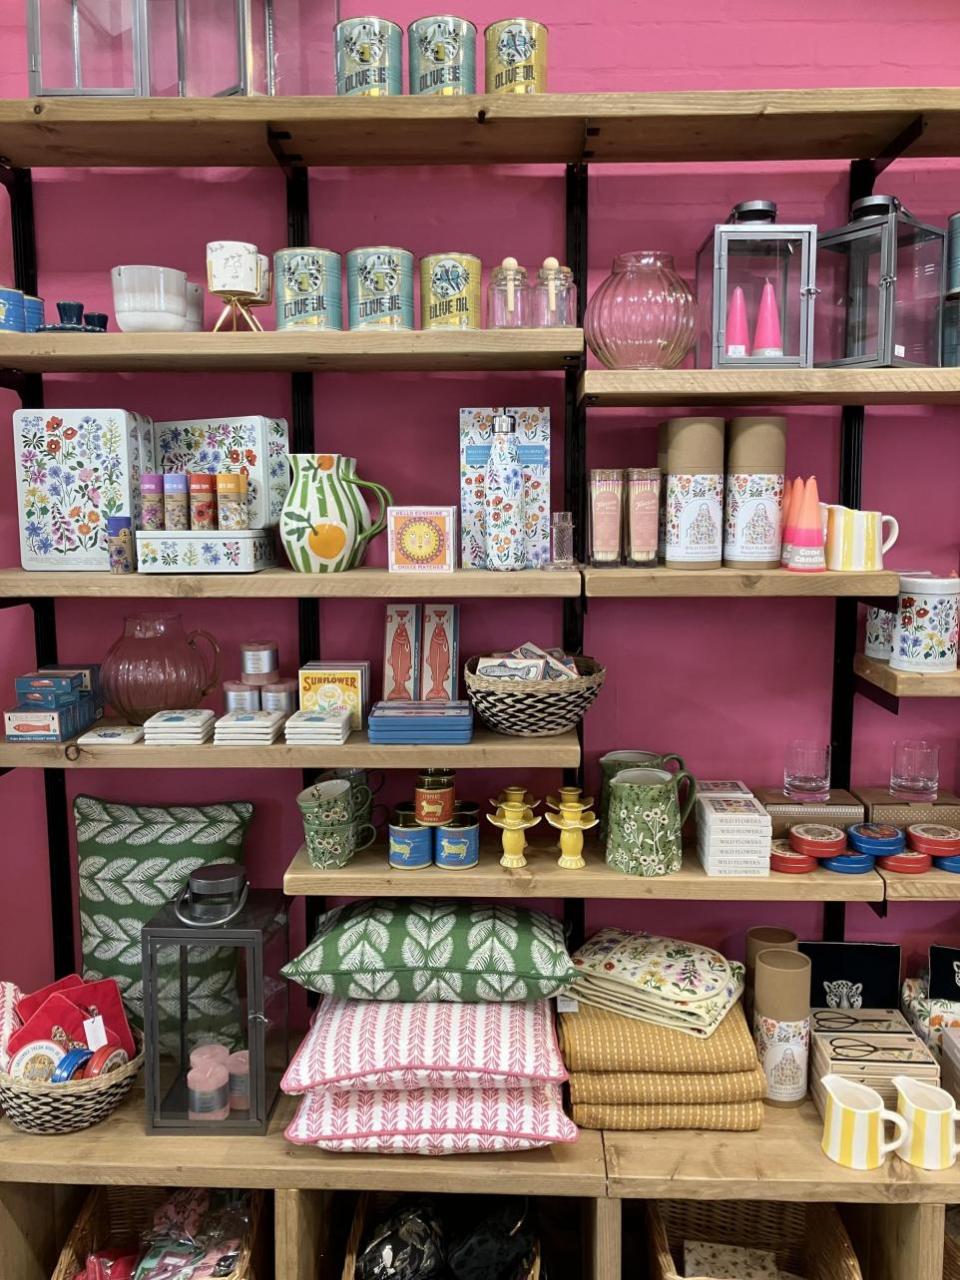 East Anglian Daily Times: The shop stocks homeware and garden-related gifts